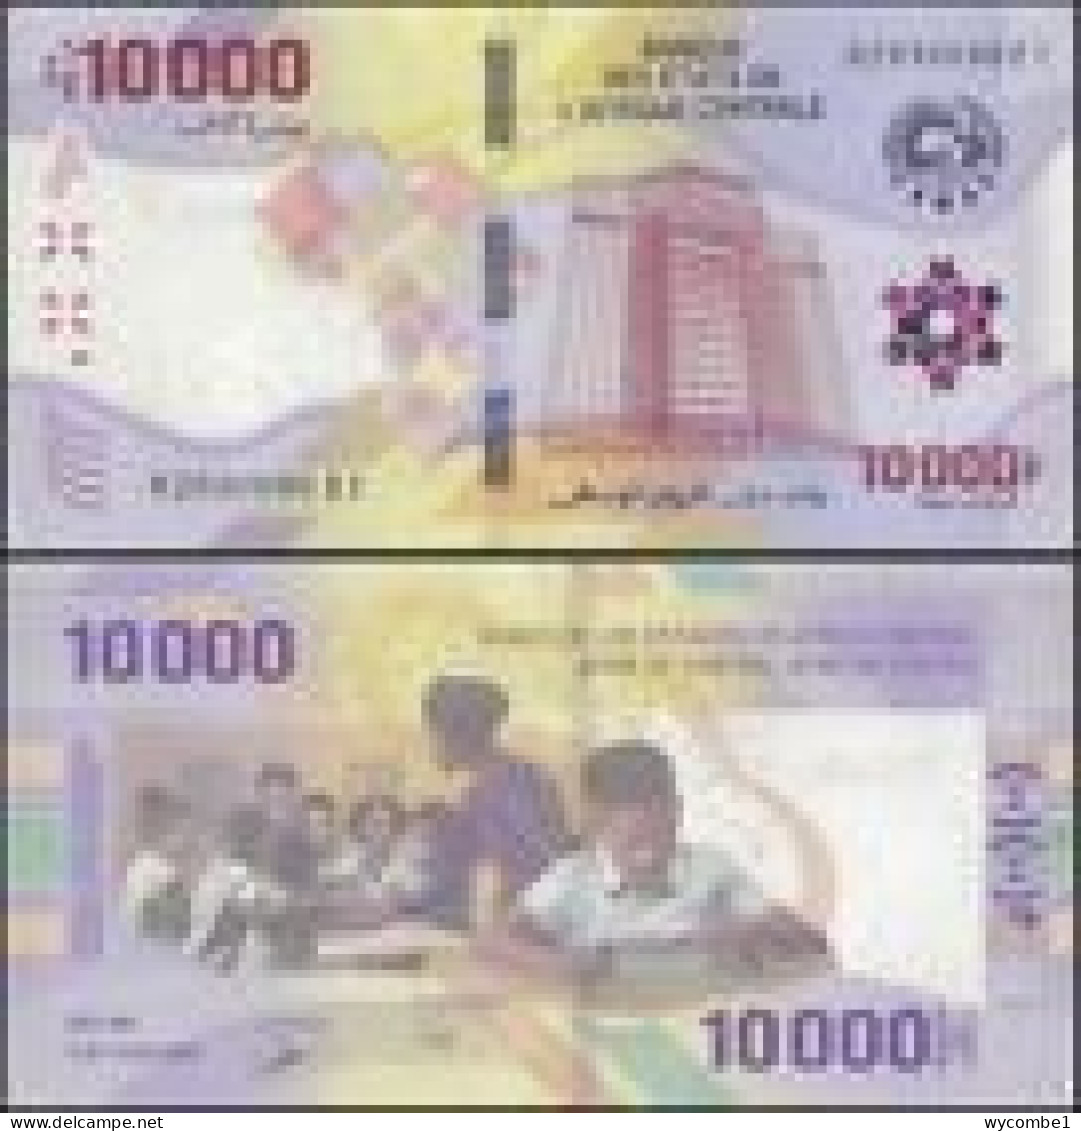 CENTRAL AFRICAN STATES  -  2020 10000 CFA  UNC  Banknote - Central African States